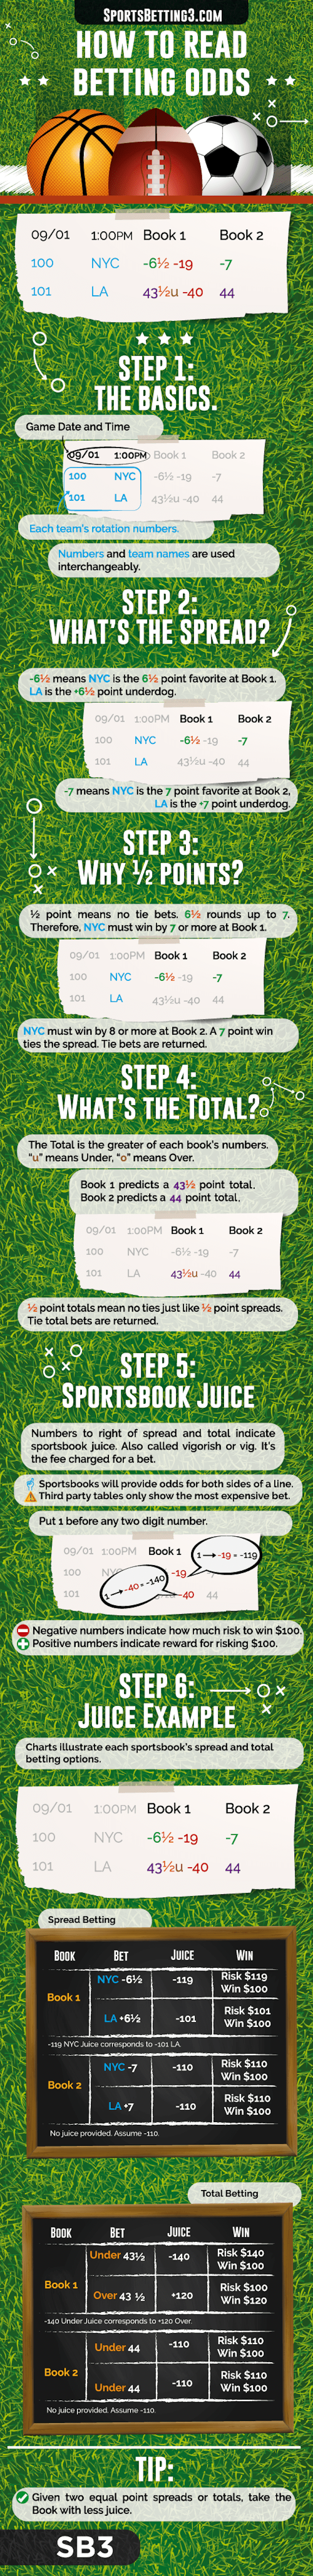 guide to sports betting book